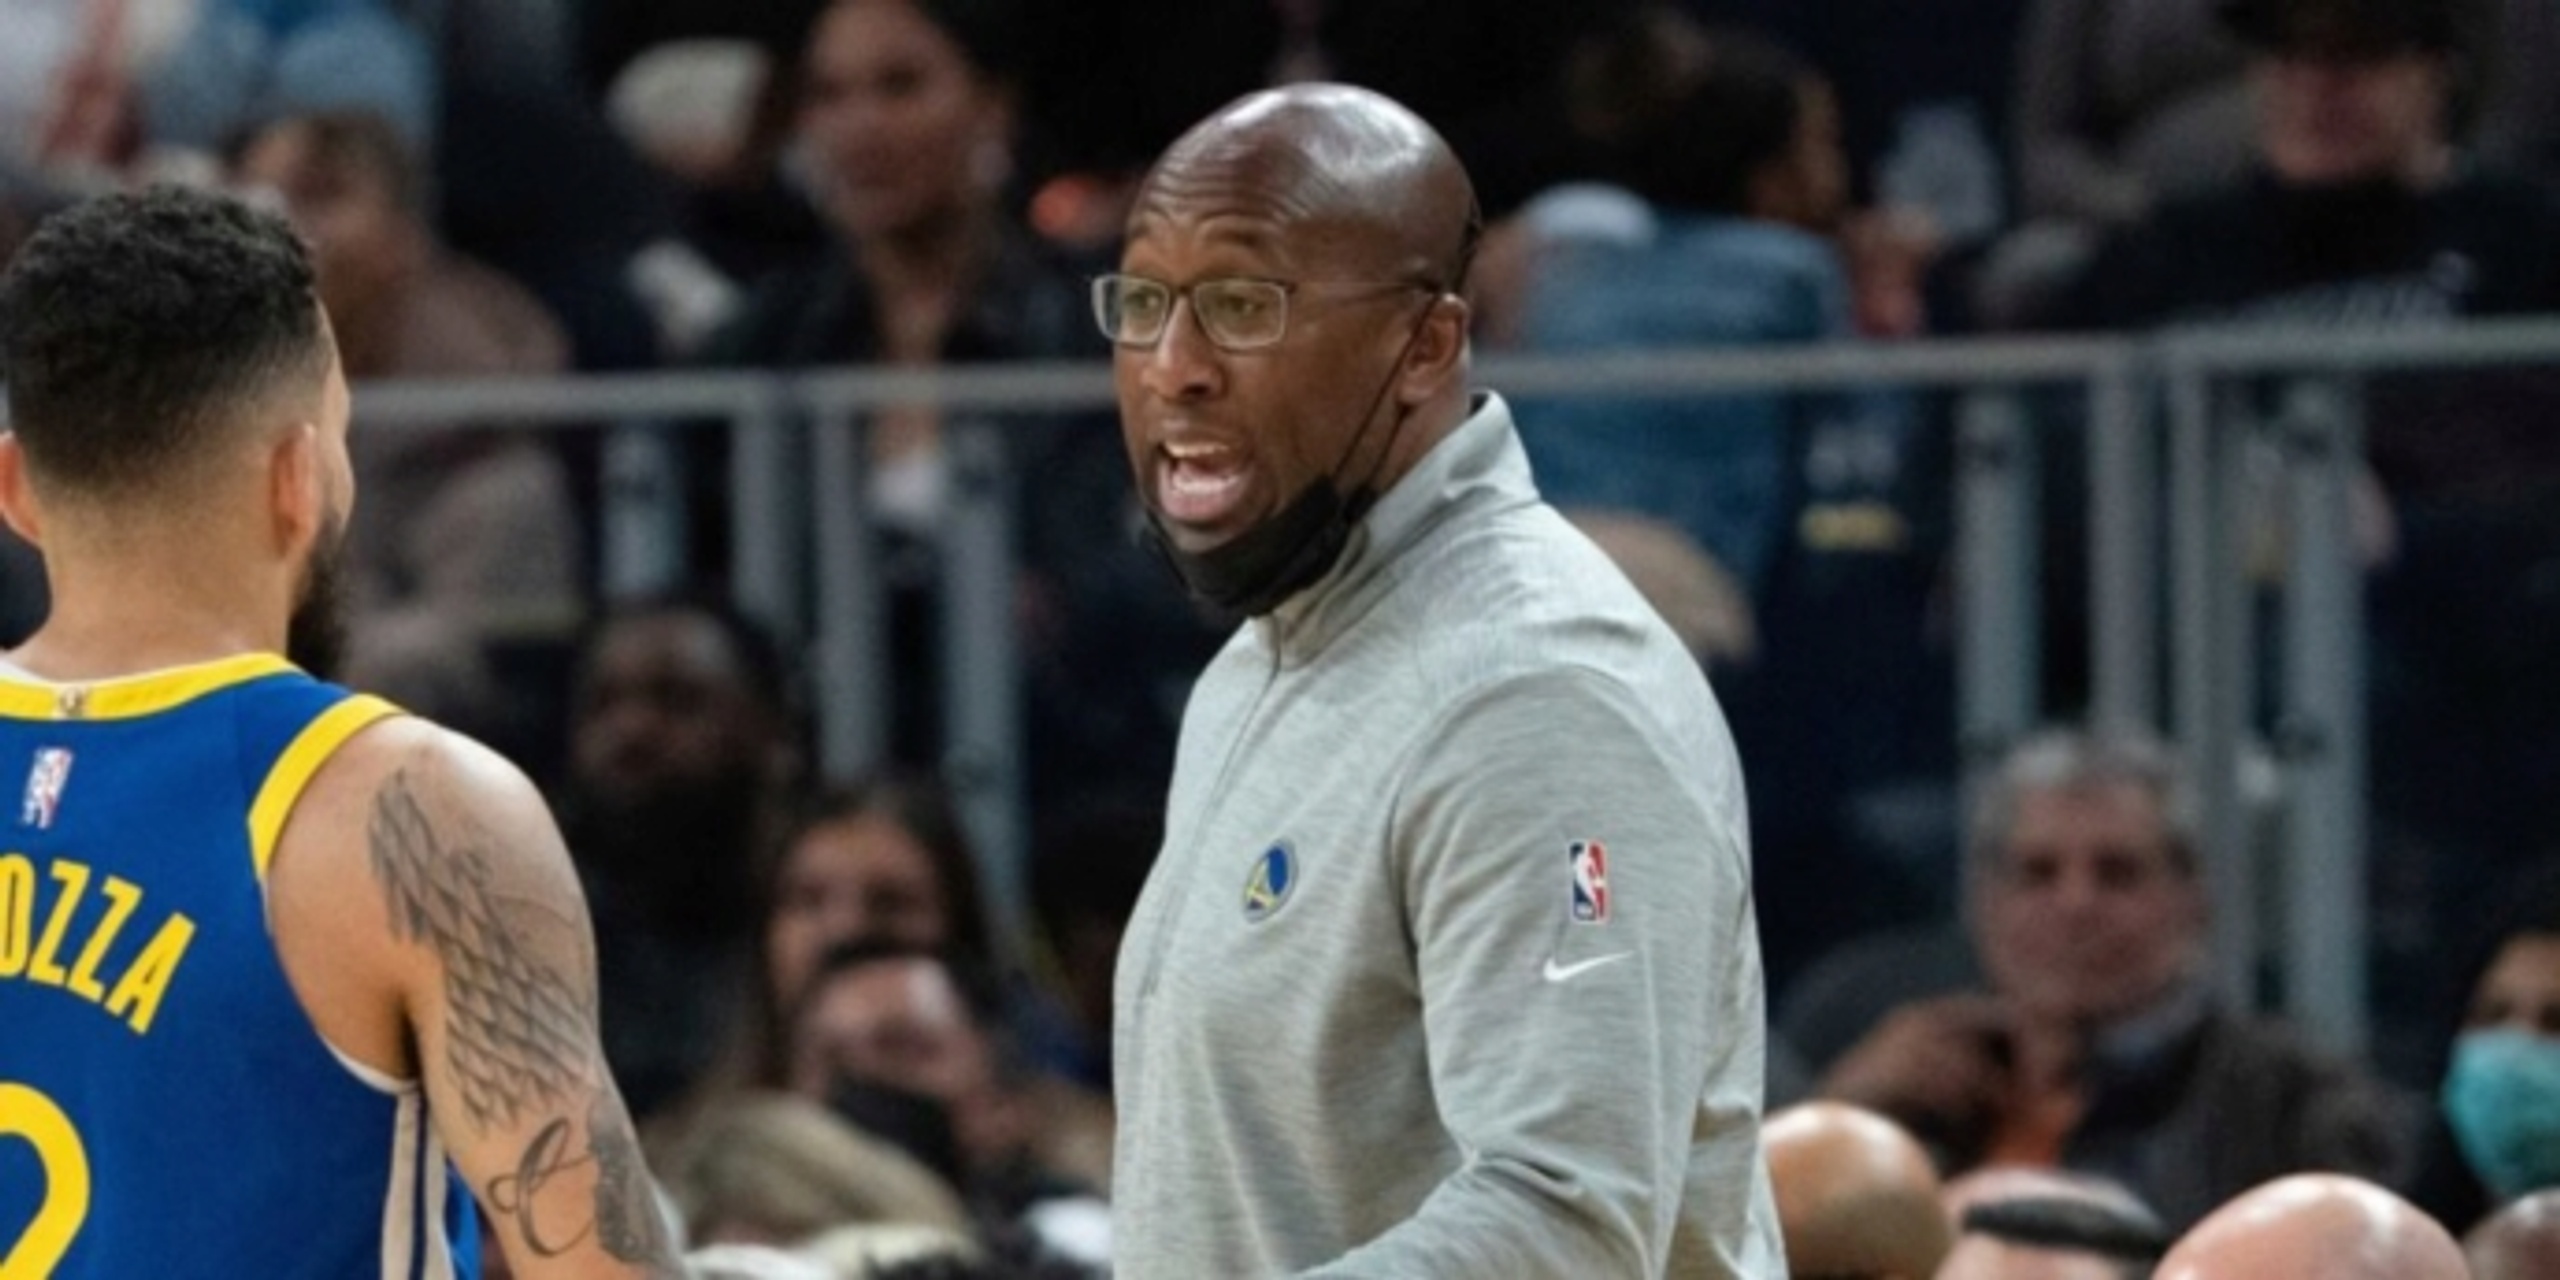 Woj: Kings hire Mike Brown to a four-year contract as head coach